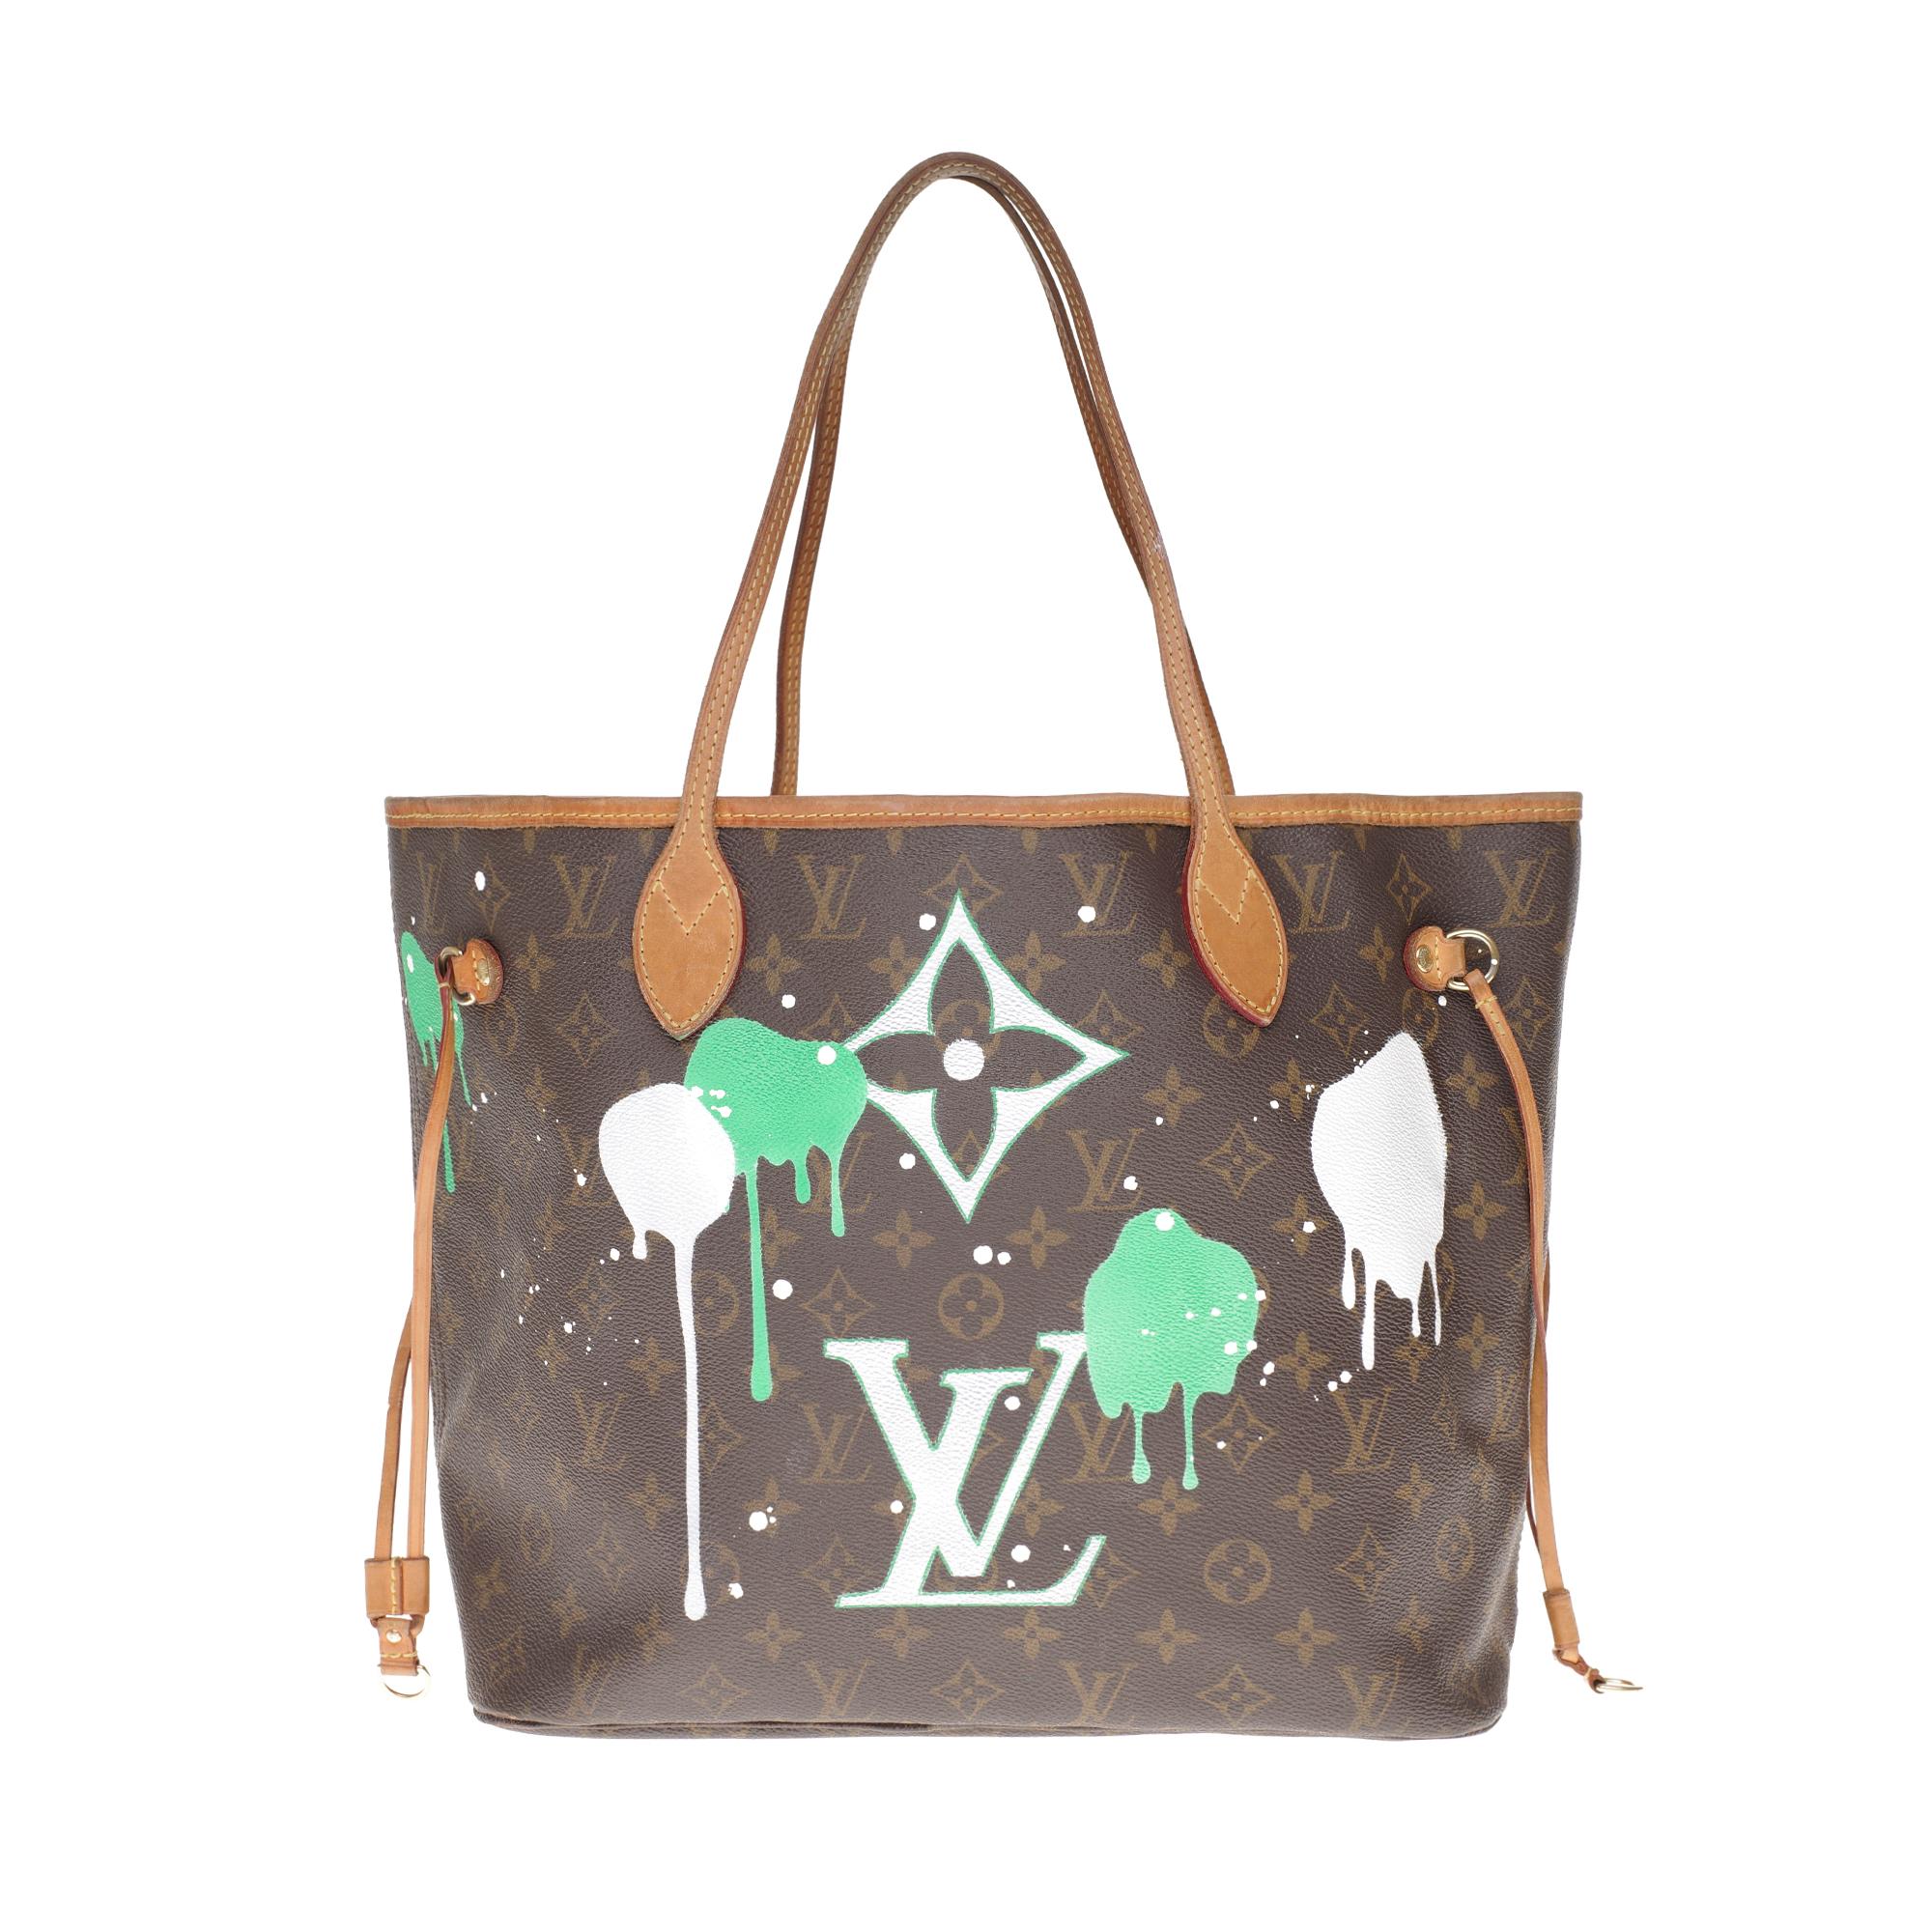 Timeless tote bag Louis Vuitton Neverfull medium model in monogram canvas coated brown , double handle in brown leather allowing a hand or shoulder carried.
This bag was named 